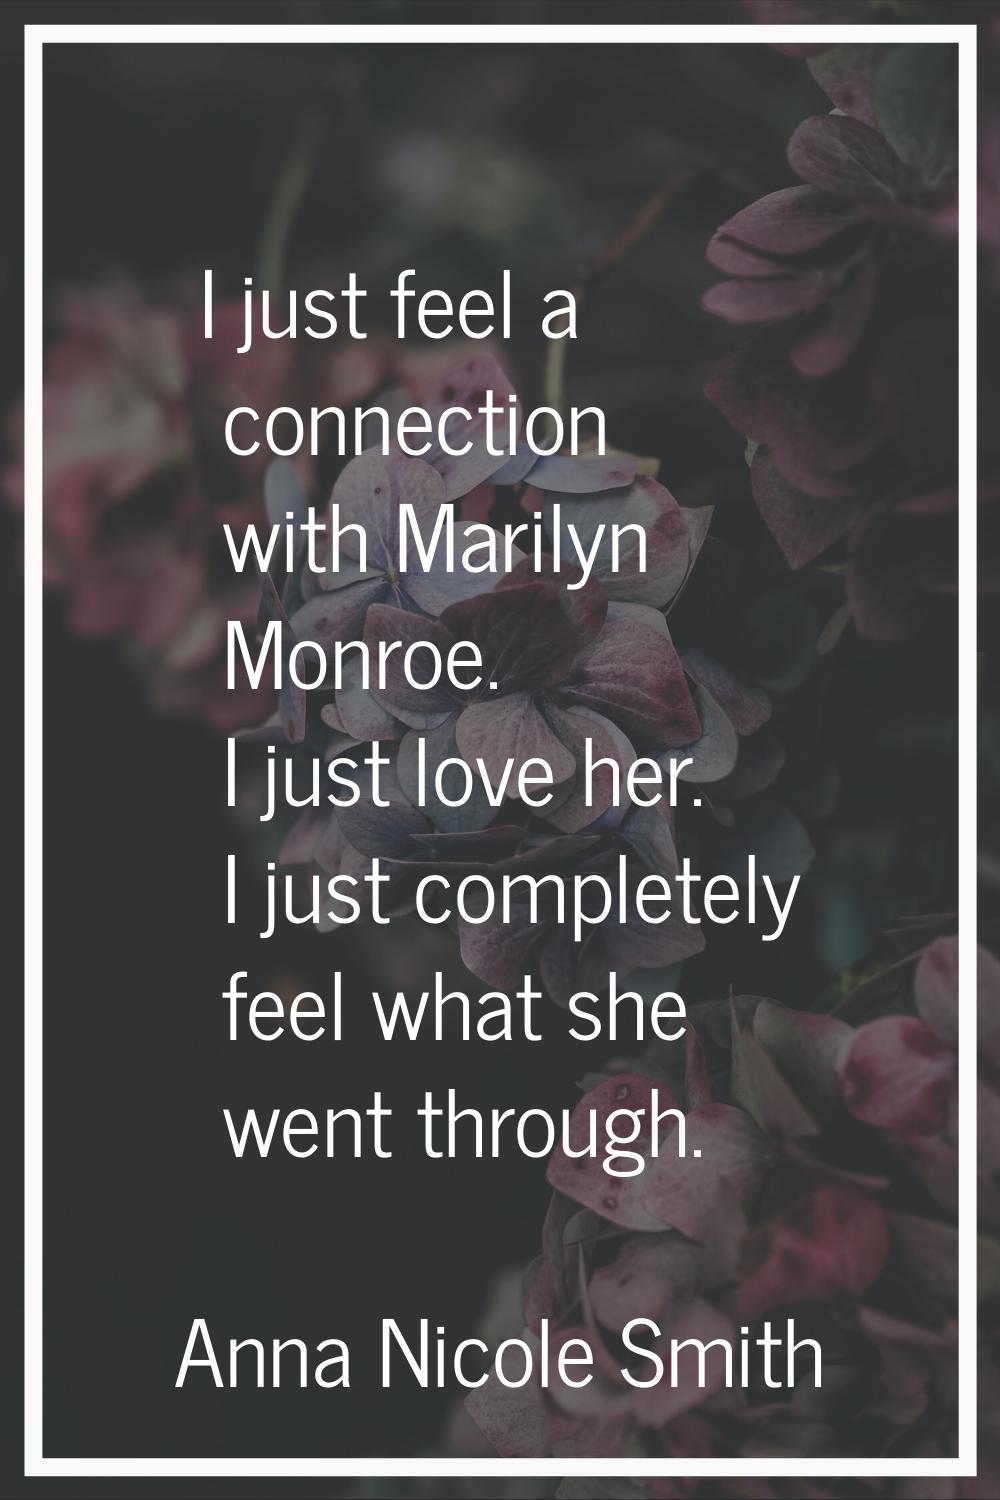 I just feel a connection with Marilyn Monroe. I just love her. I just completely feel what she went